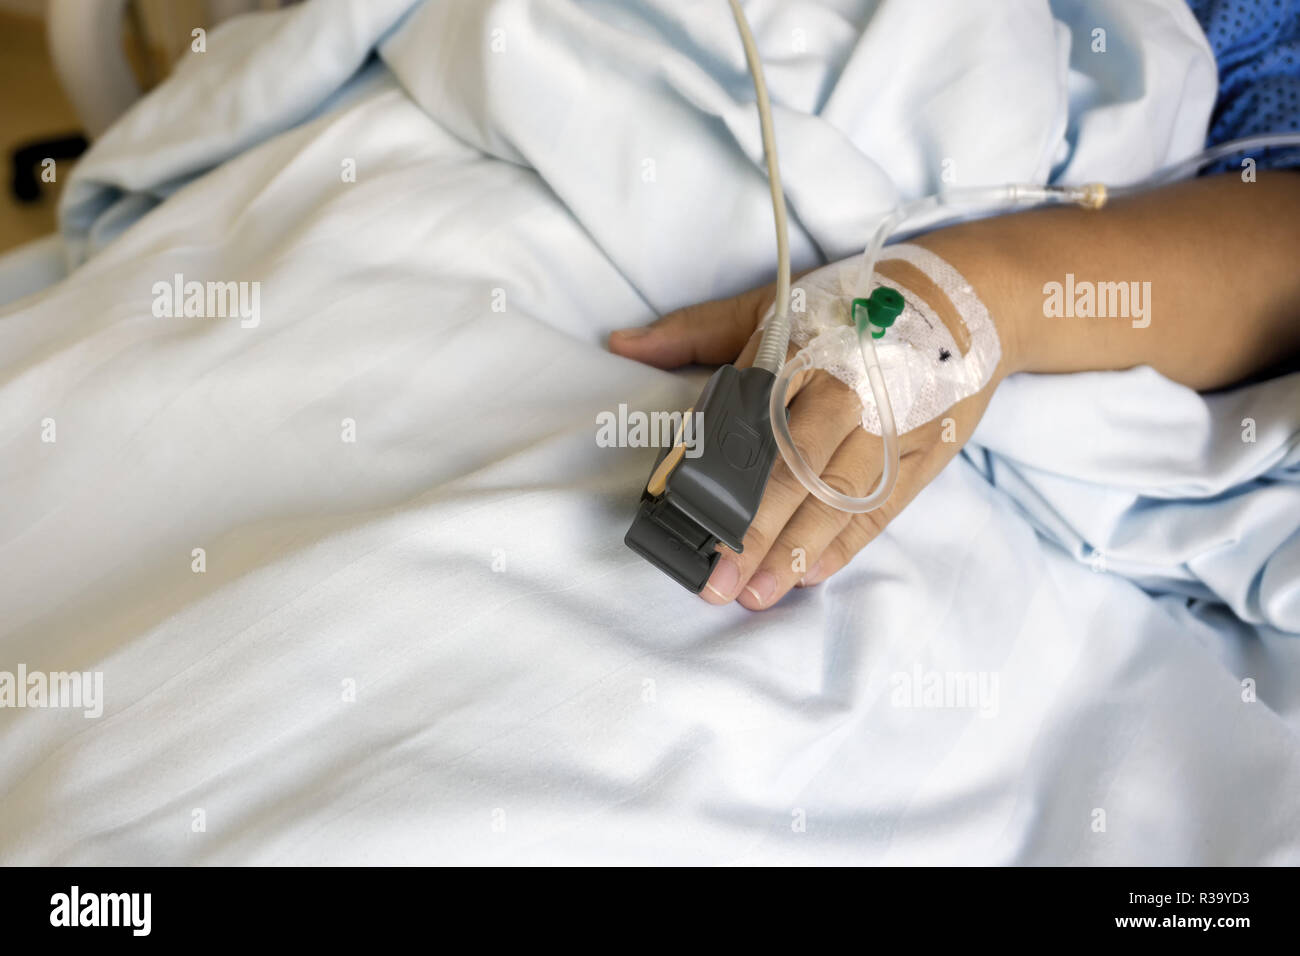 SpO2 Sensor (peripheral capillary oxygen saturation) and Iv Drip on Patient Hands at the Hospital Room. Stock Photo